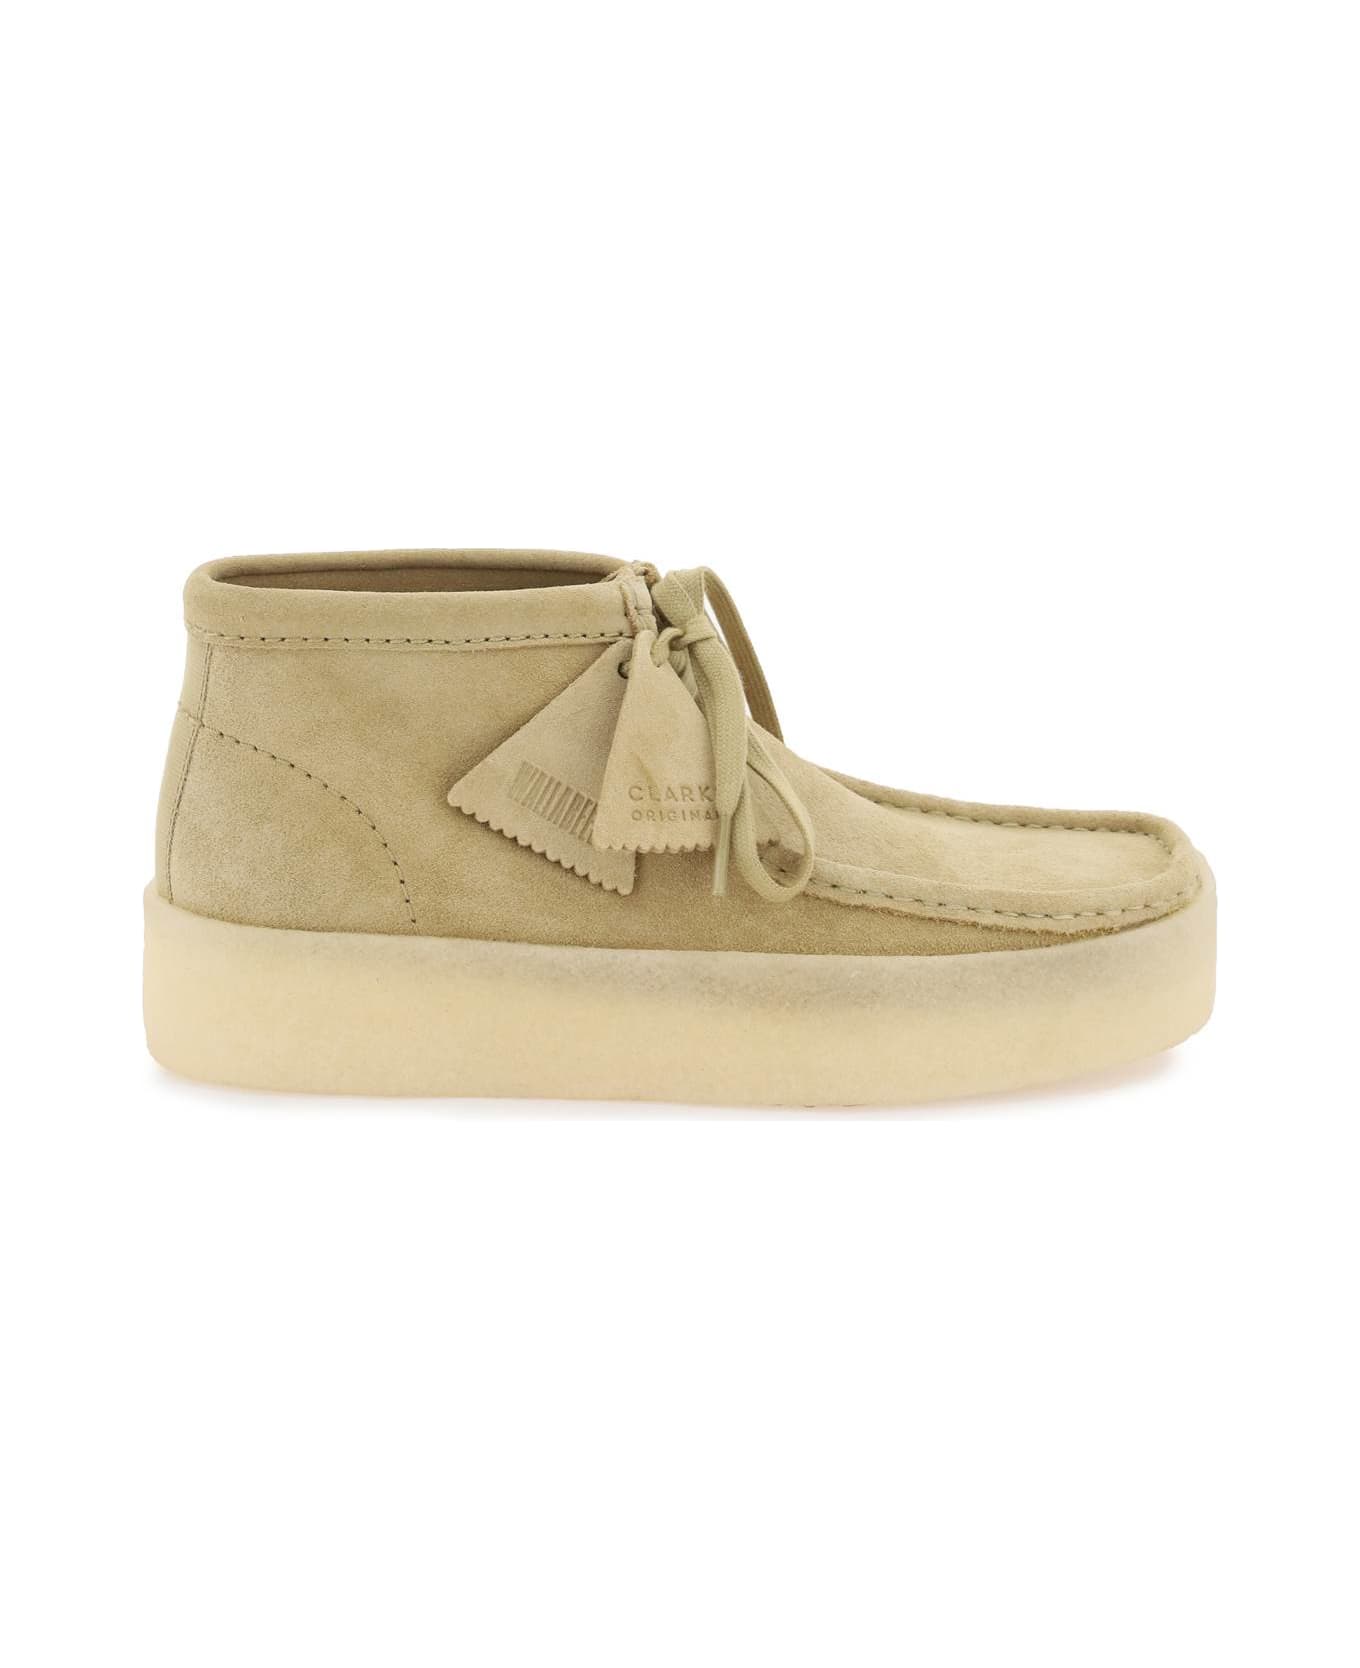 Clarks 'wallabee Cup Bt' Lace-up Shoes - MAPLE (Beige)